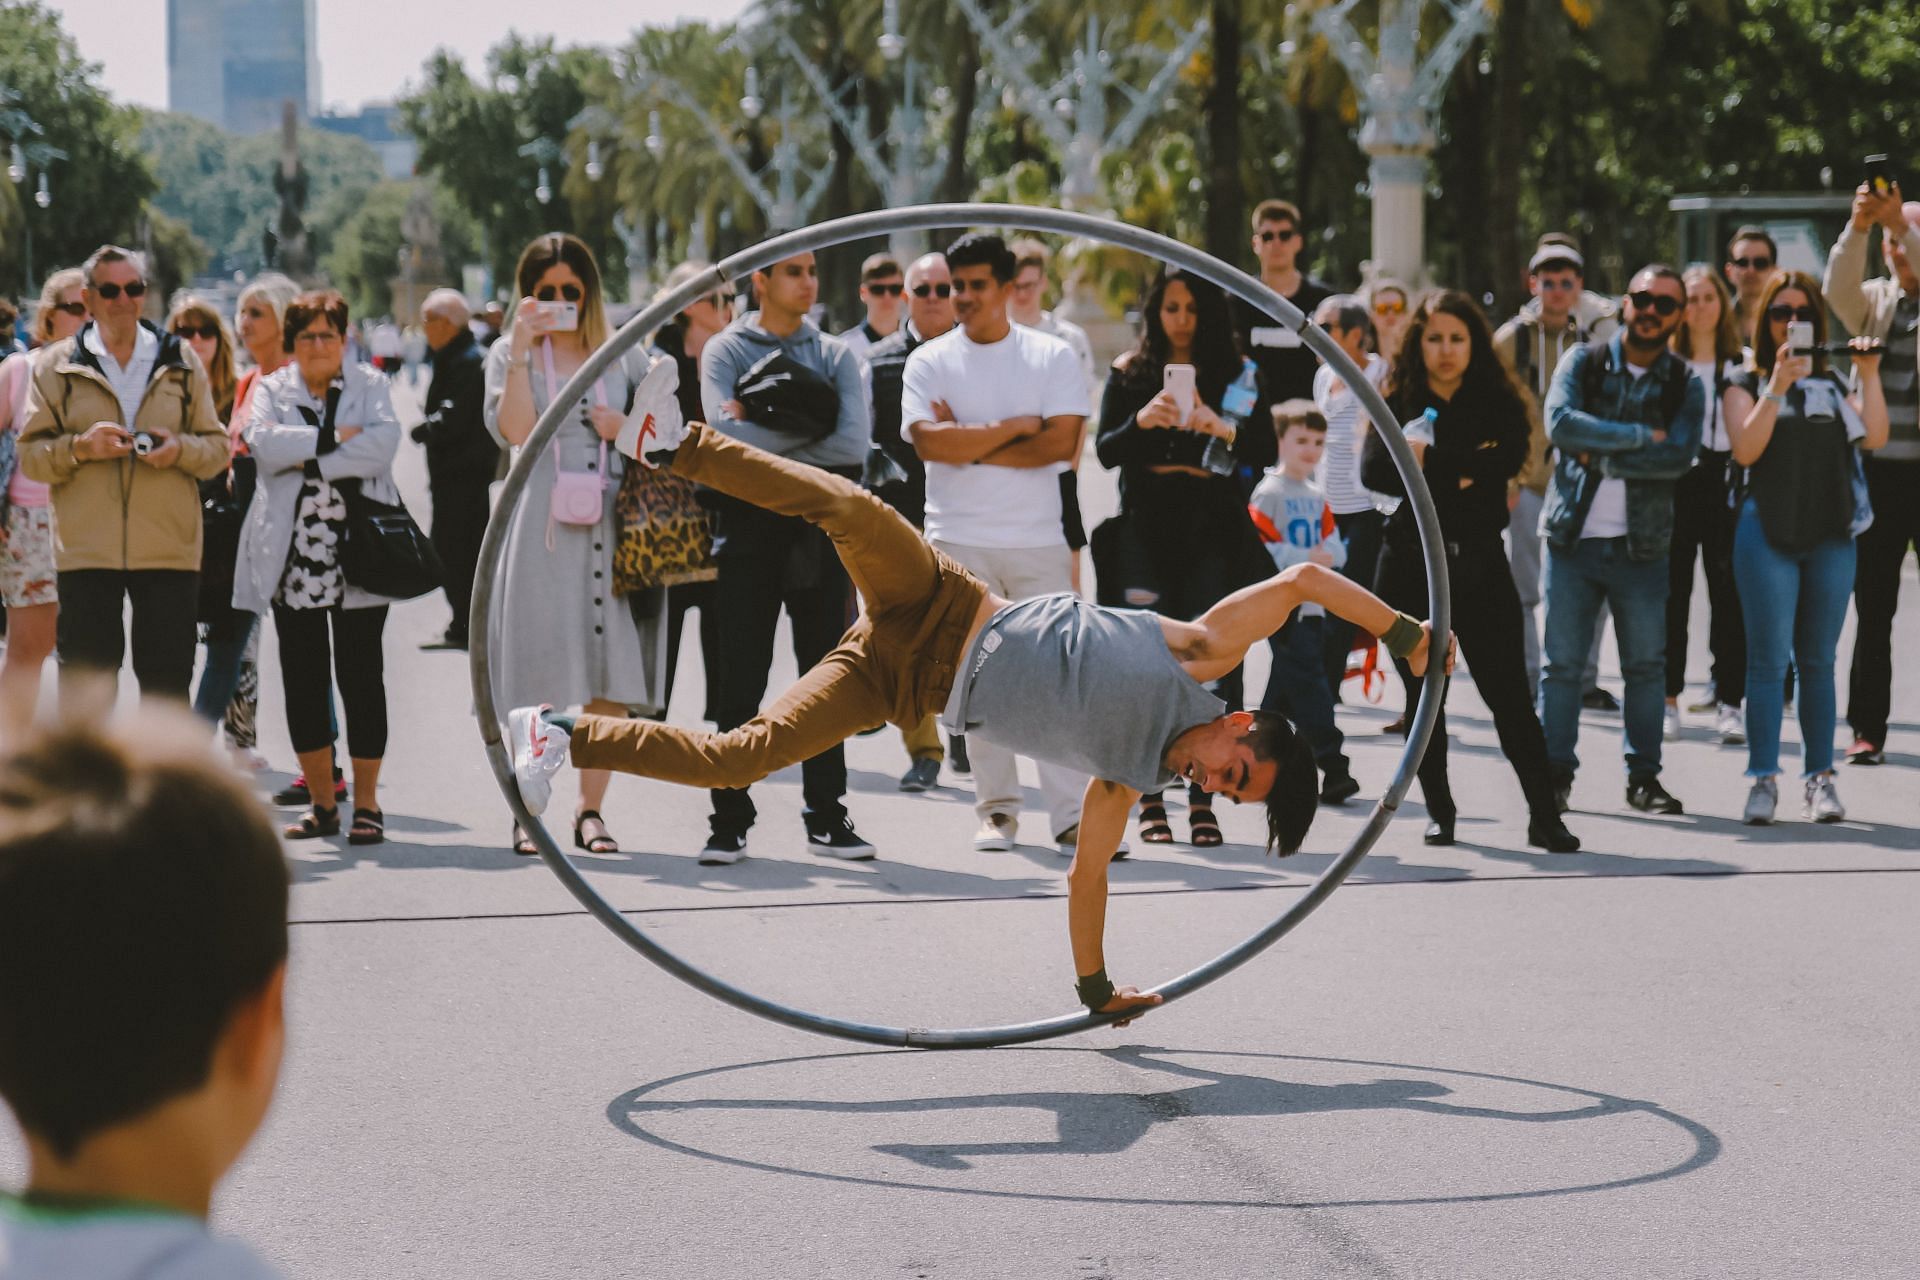 A weighted hula hoop can increase resistance and make your workout harder. (Image via Unsplash/Kristijan Arsov)